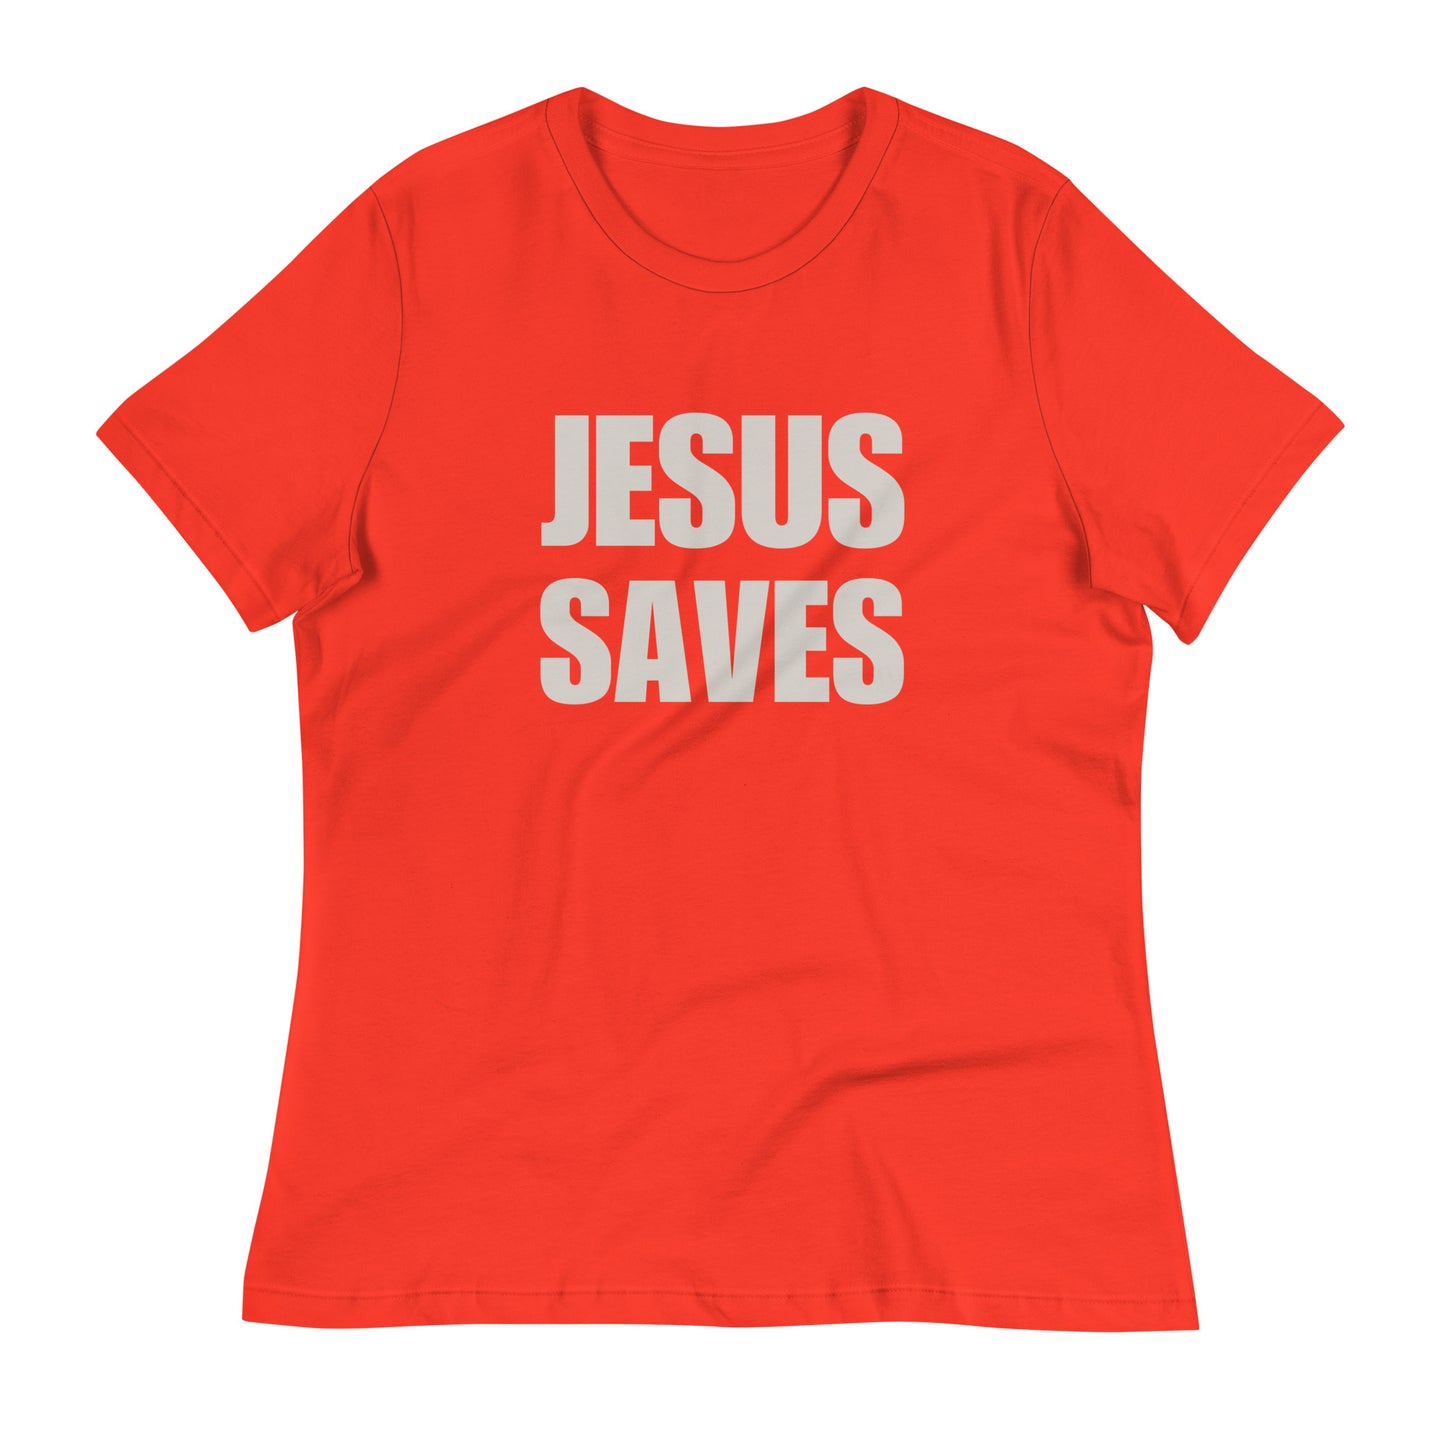 Jesus Saves Women's Relaxed T-Shirt